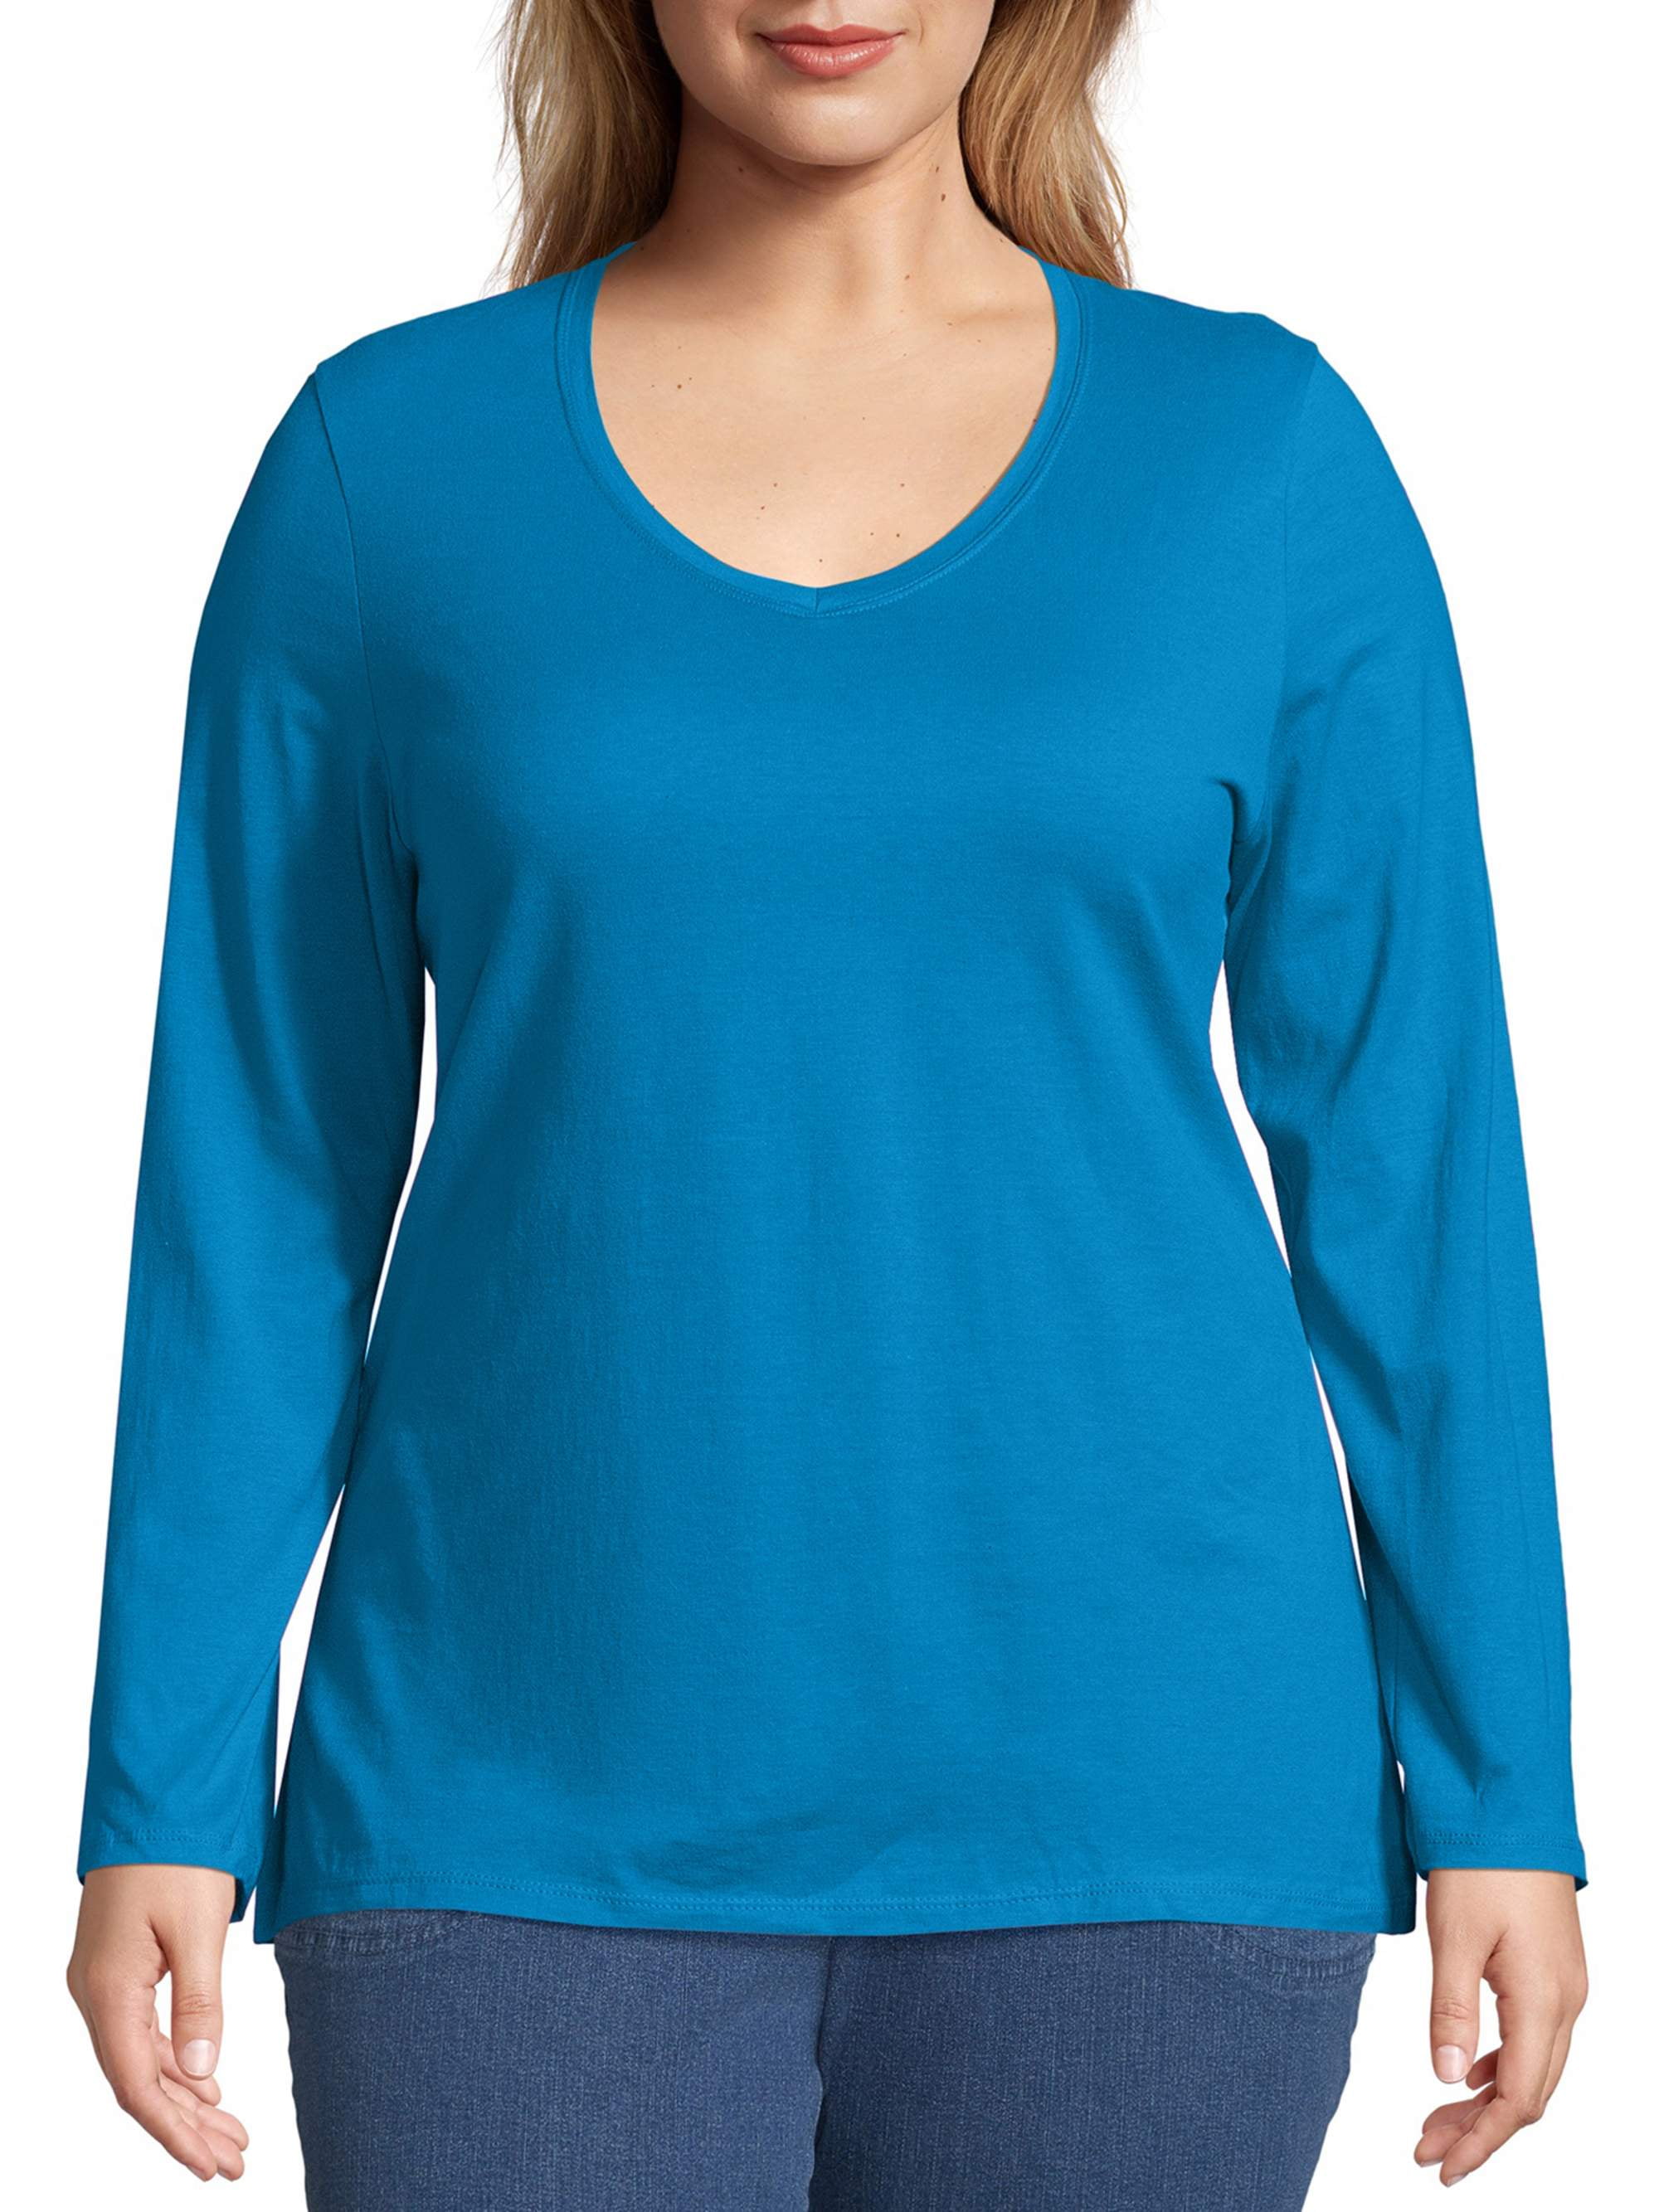 Ladies Plus Size Long Sleeve V-Neck T Shirt Cotton Womens Top Tee